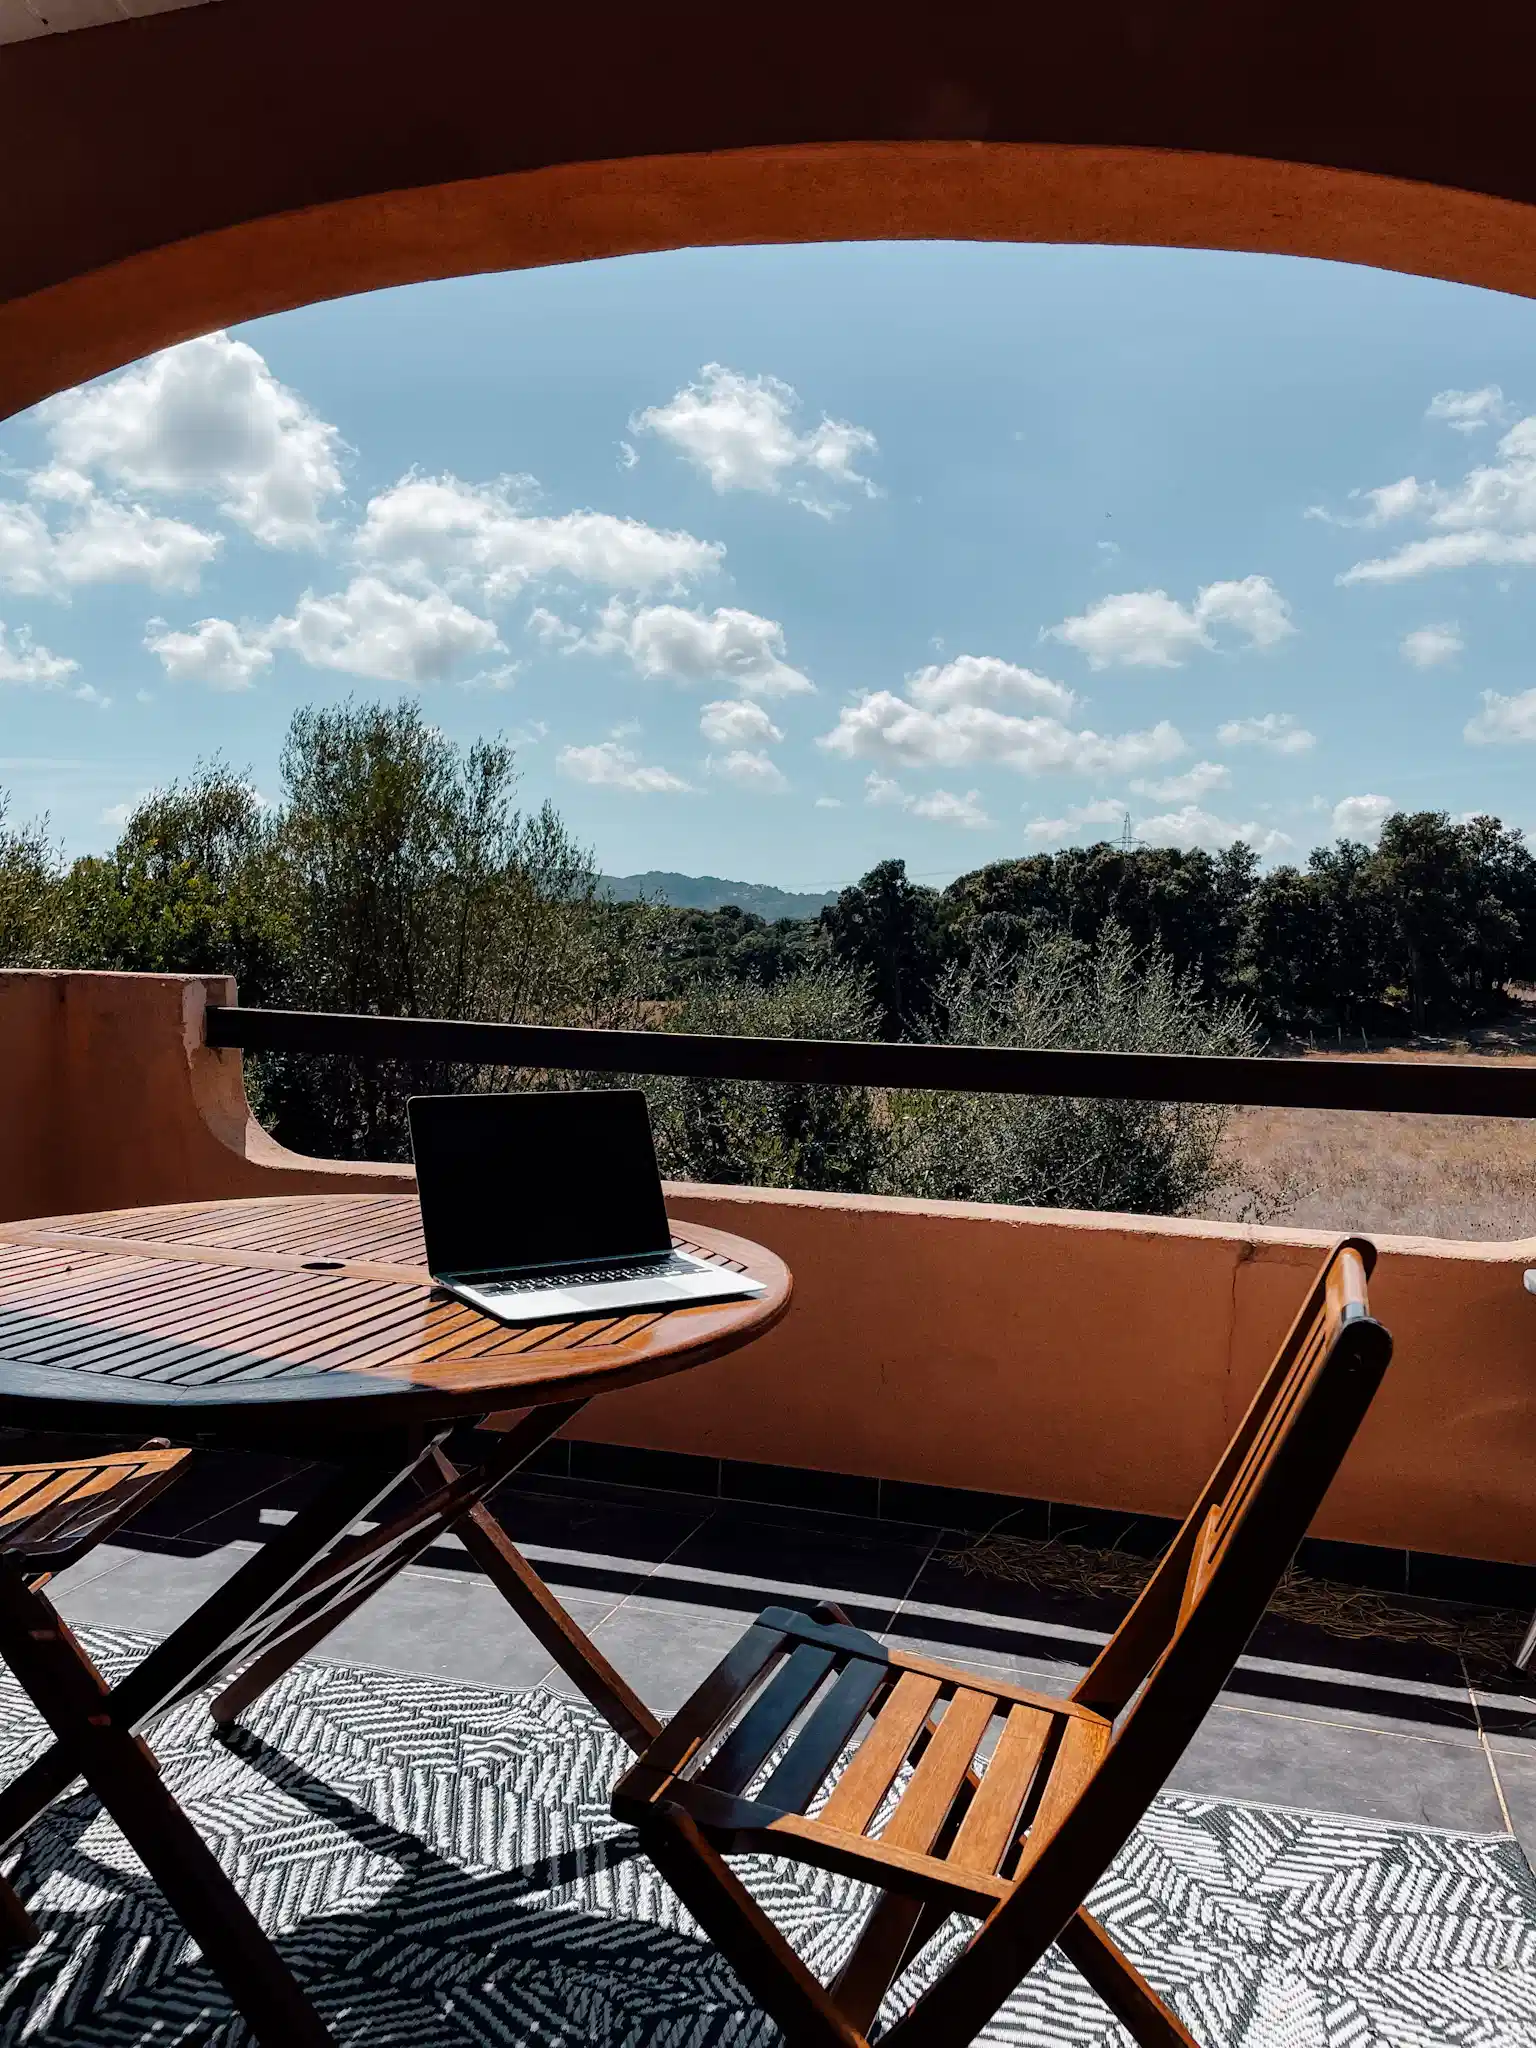 A computer sites on a wooden table on a porch. In the background there is the faint hint of rolling hills with trees and bushes right up to the edge of the porch. 